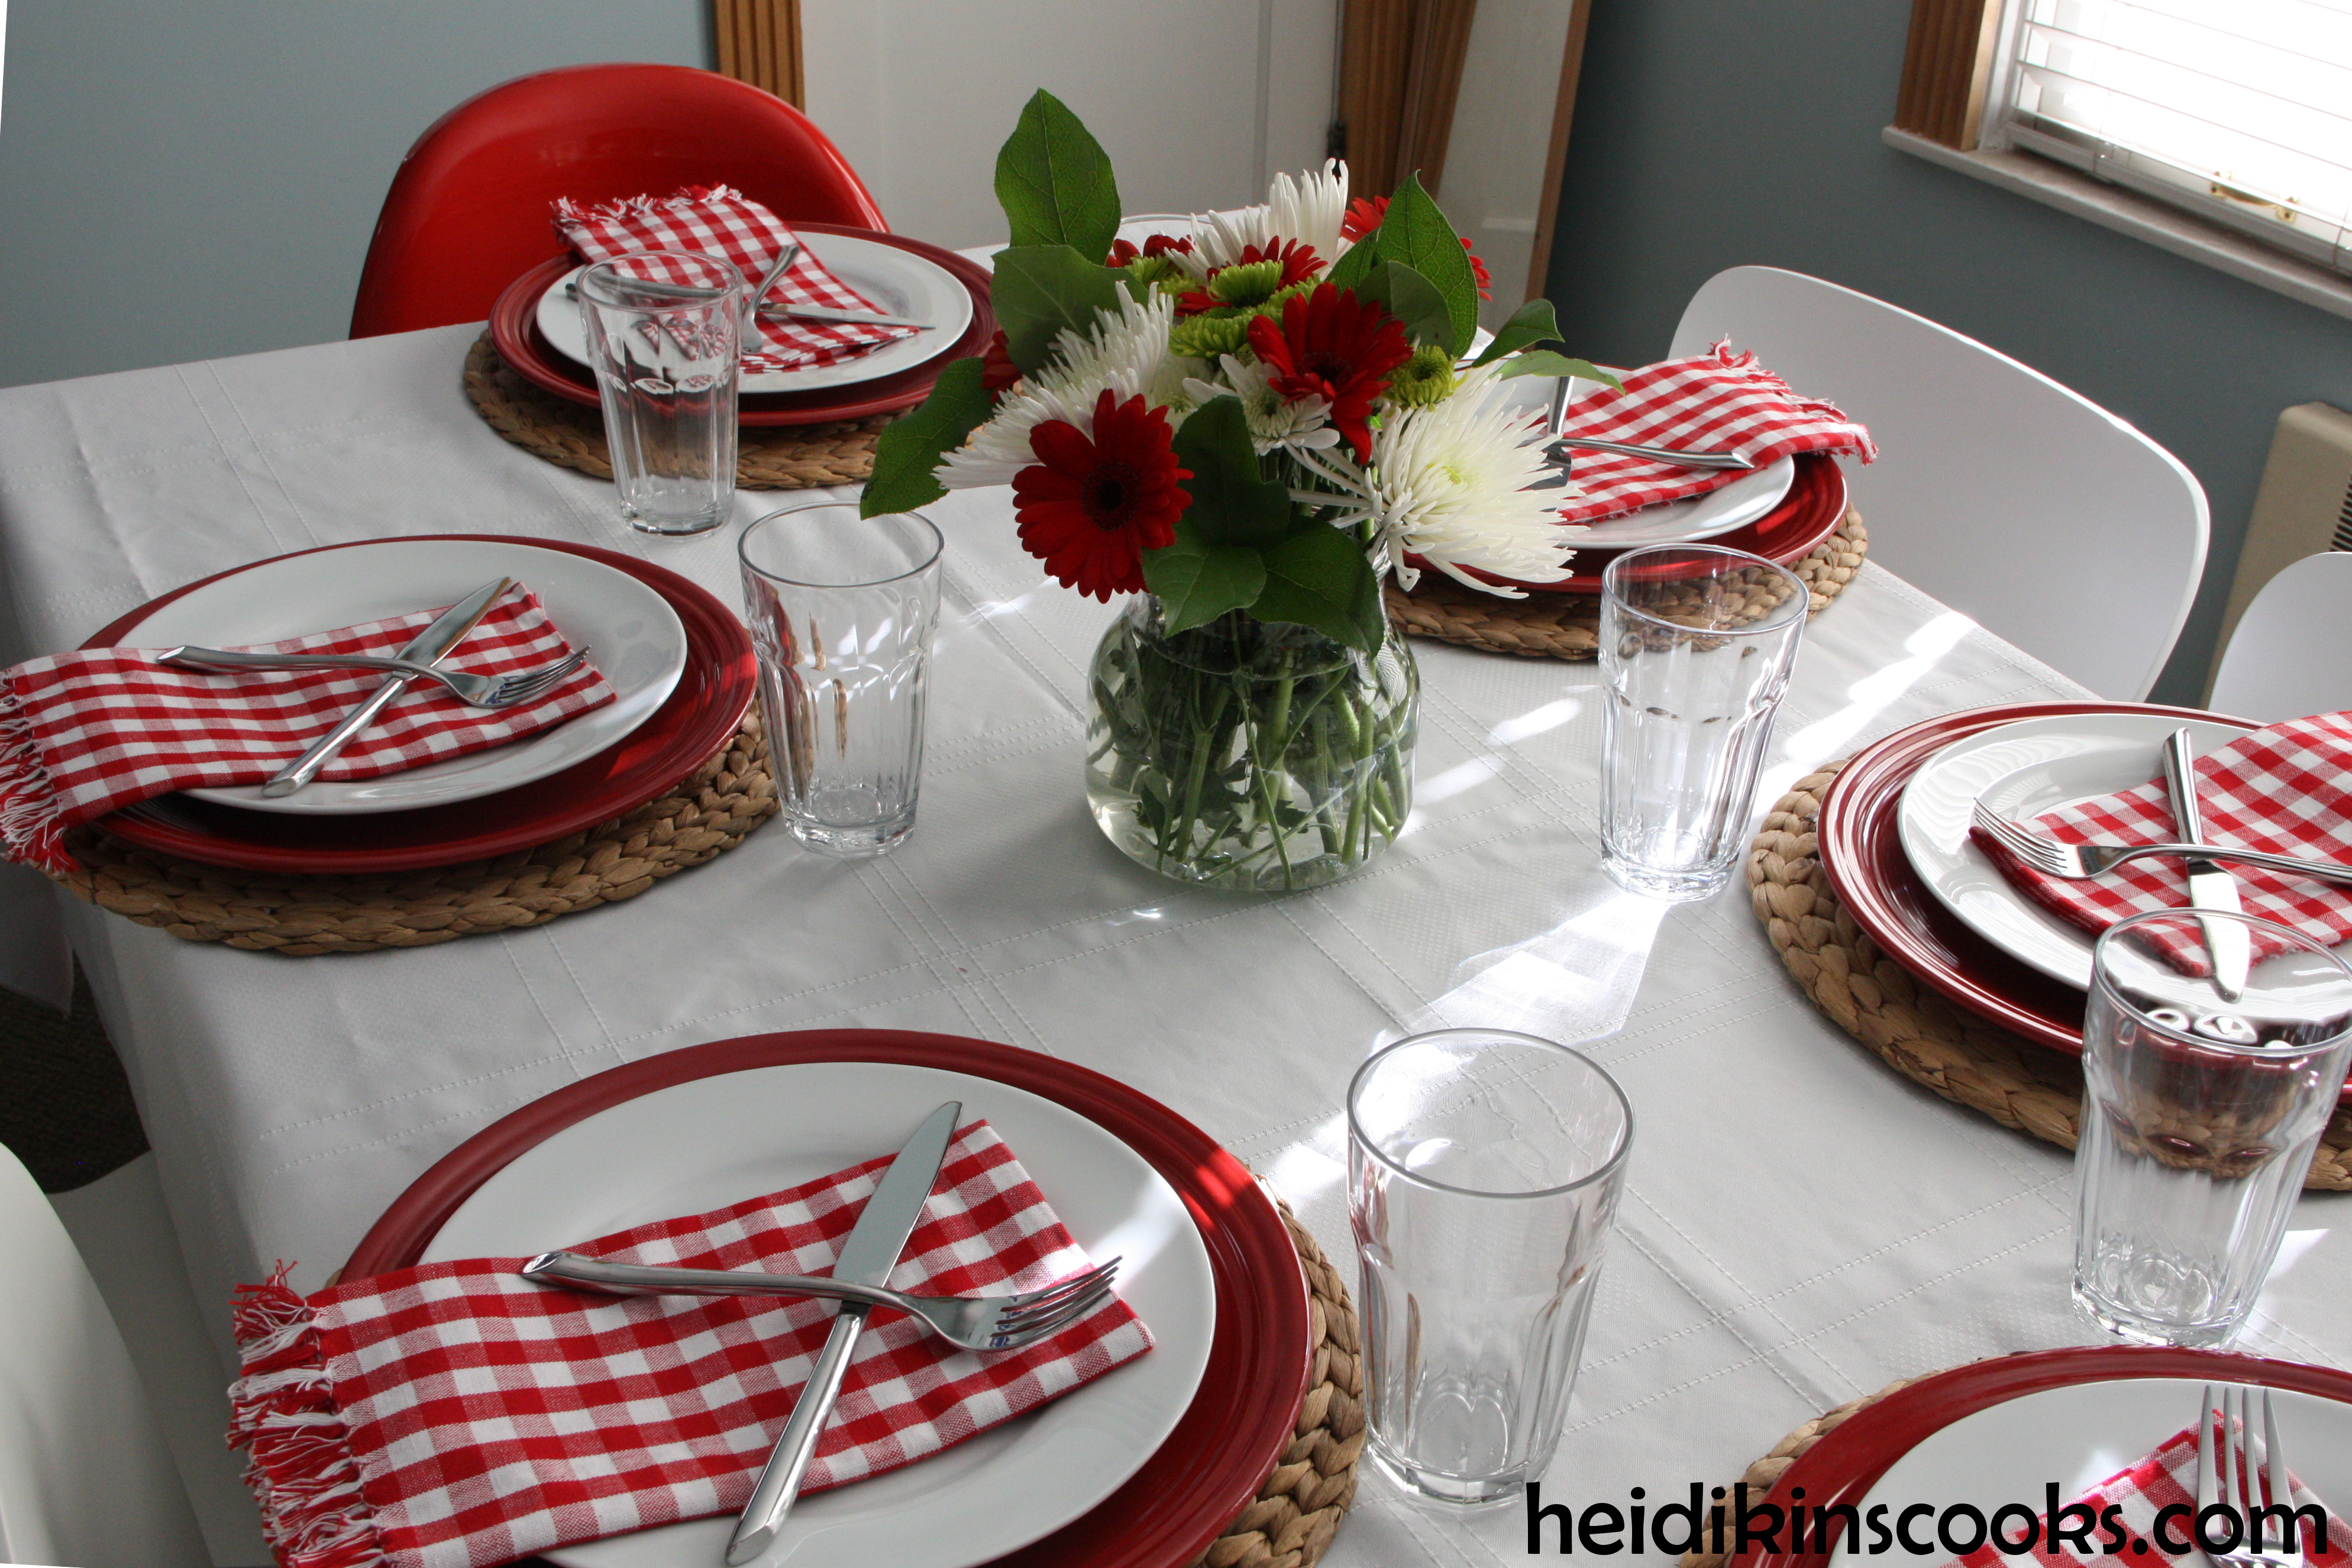 Casual Valentine’s Day Table Setting | heidikins cooks3976 x 2651